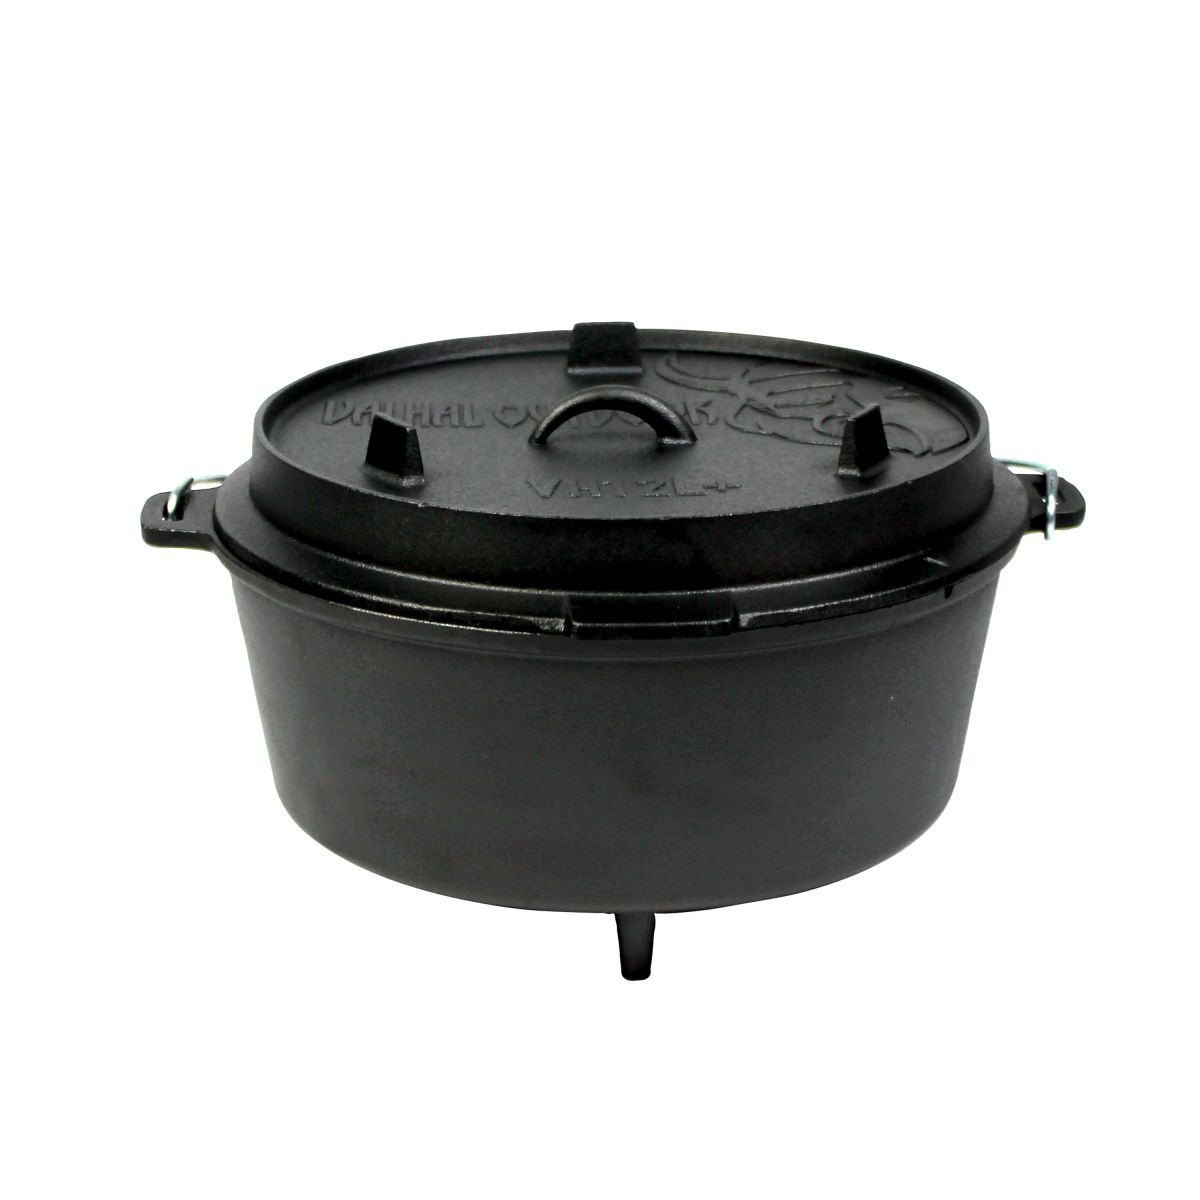 vh12l dutch oven 12l with feet